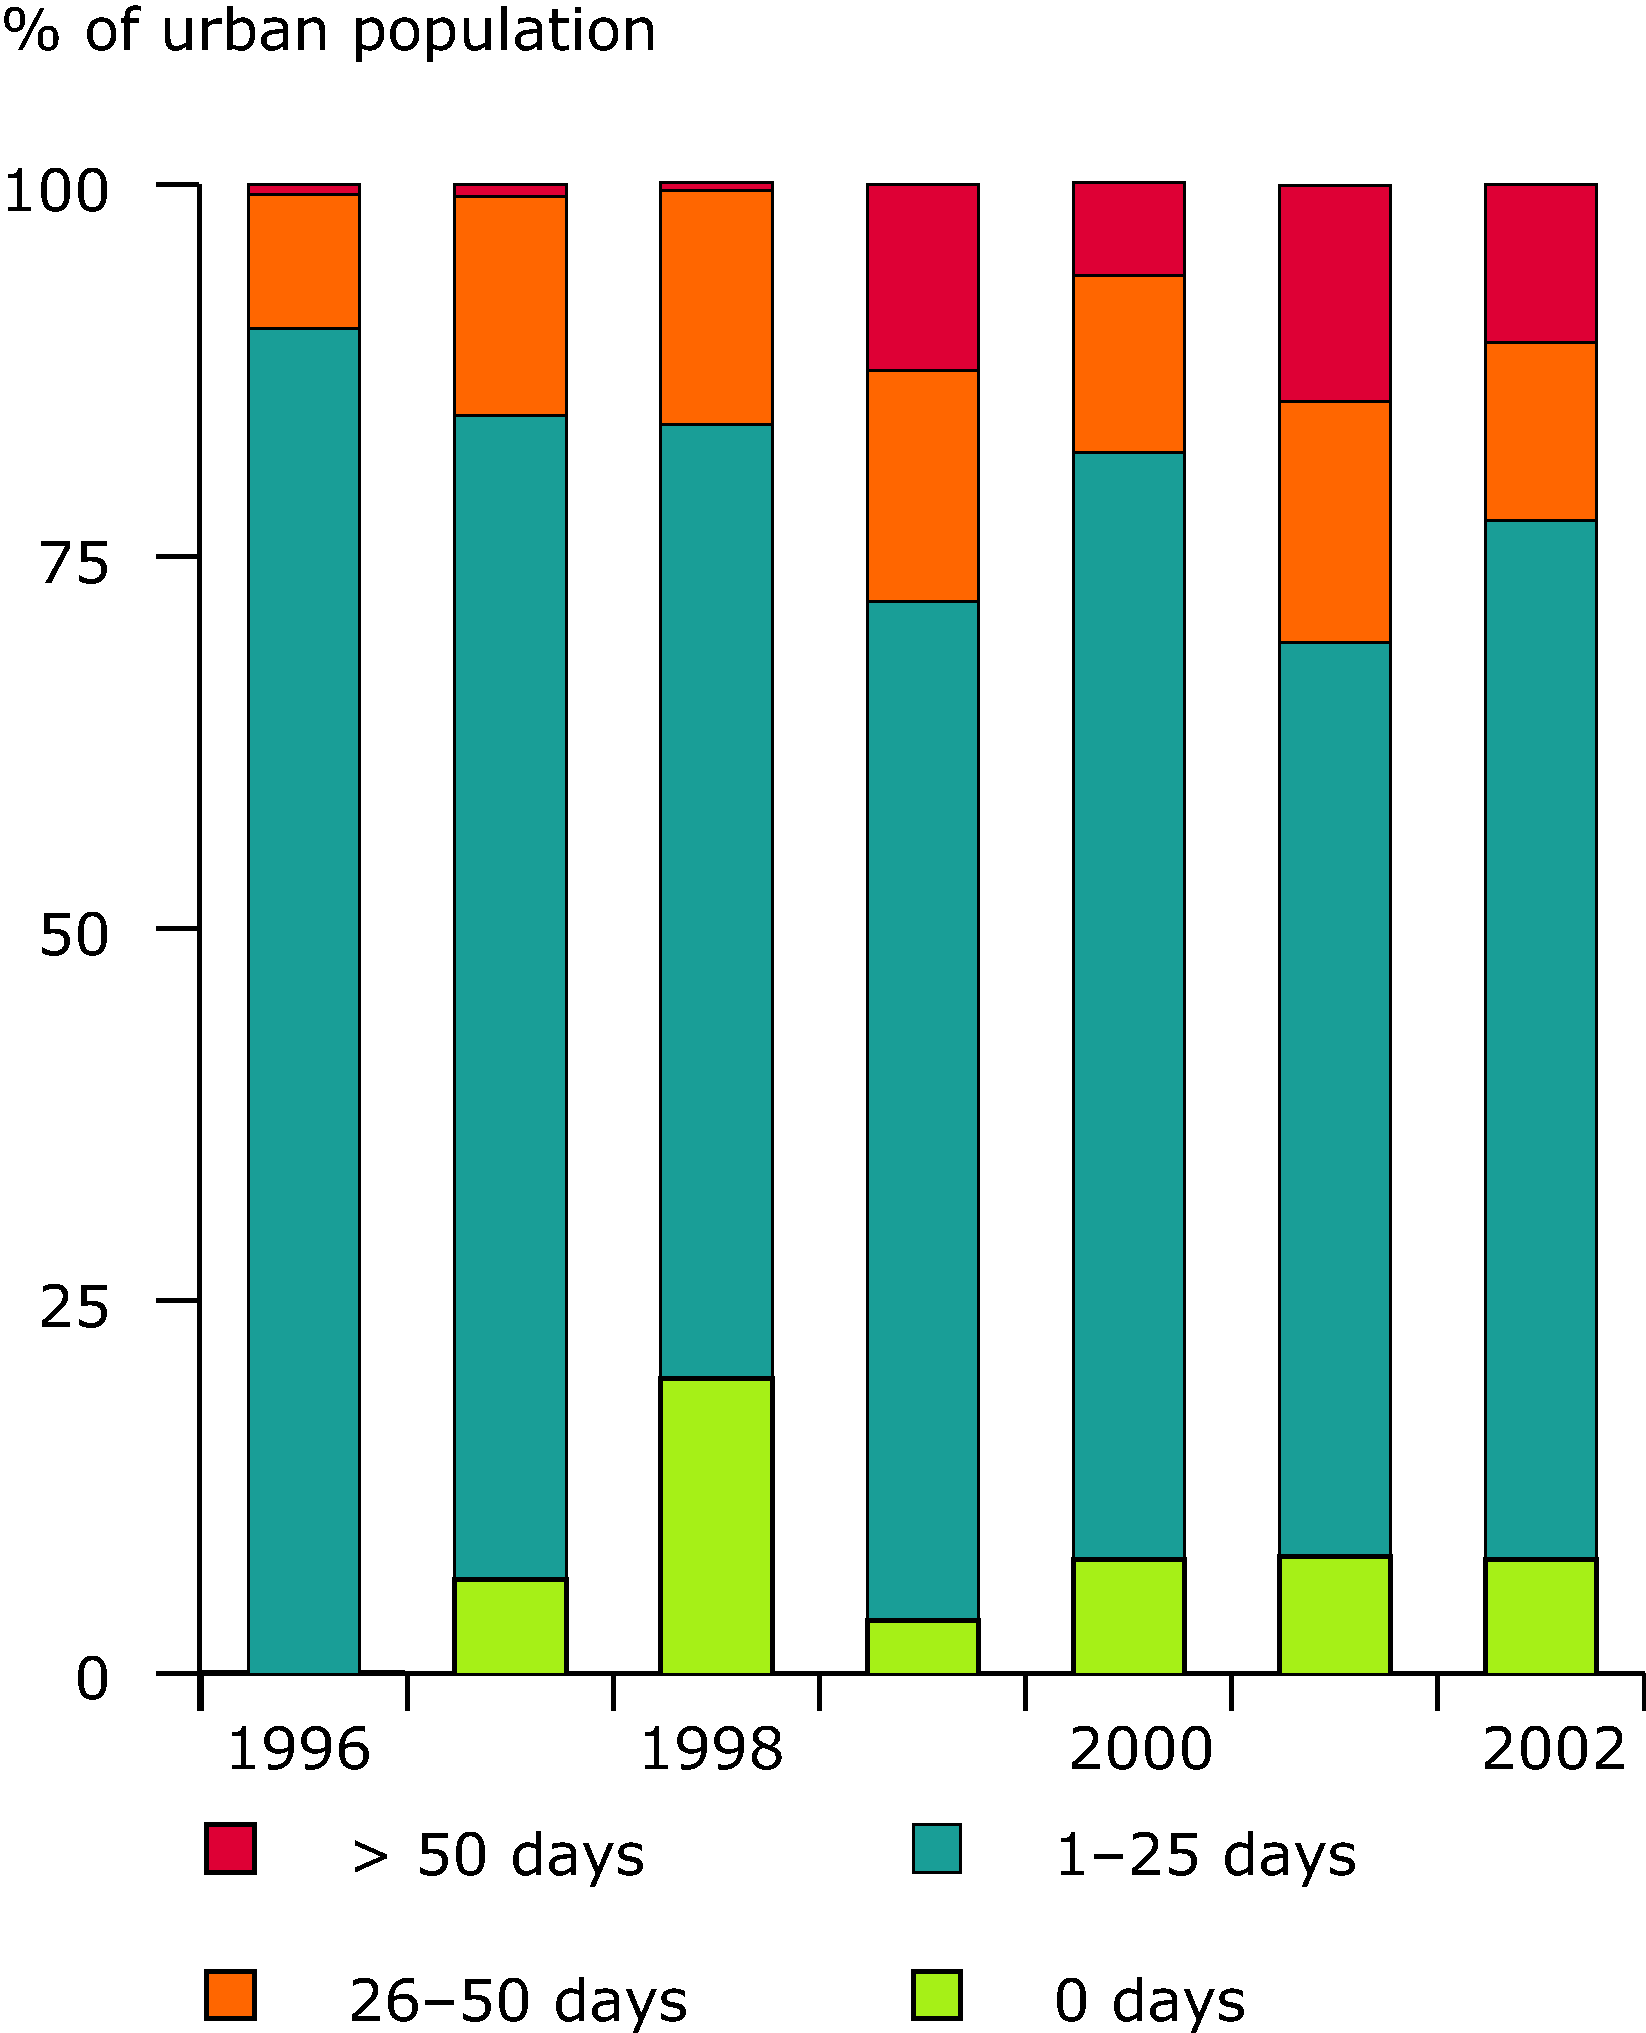 Exceedance of air quality target values for ozone in urban areas (EEA member countries), 1996-2002